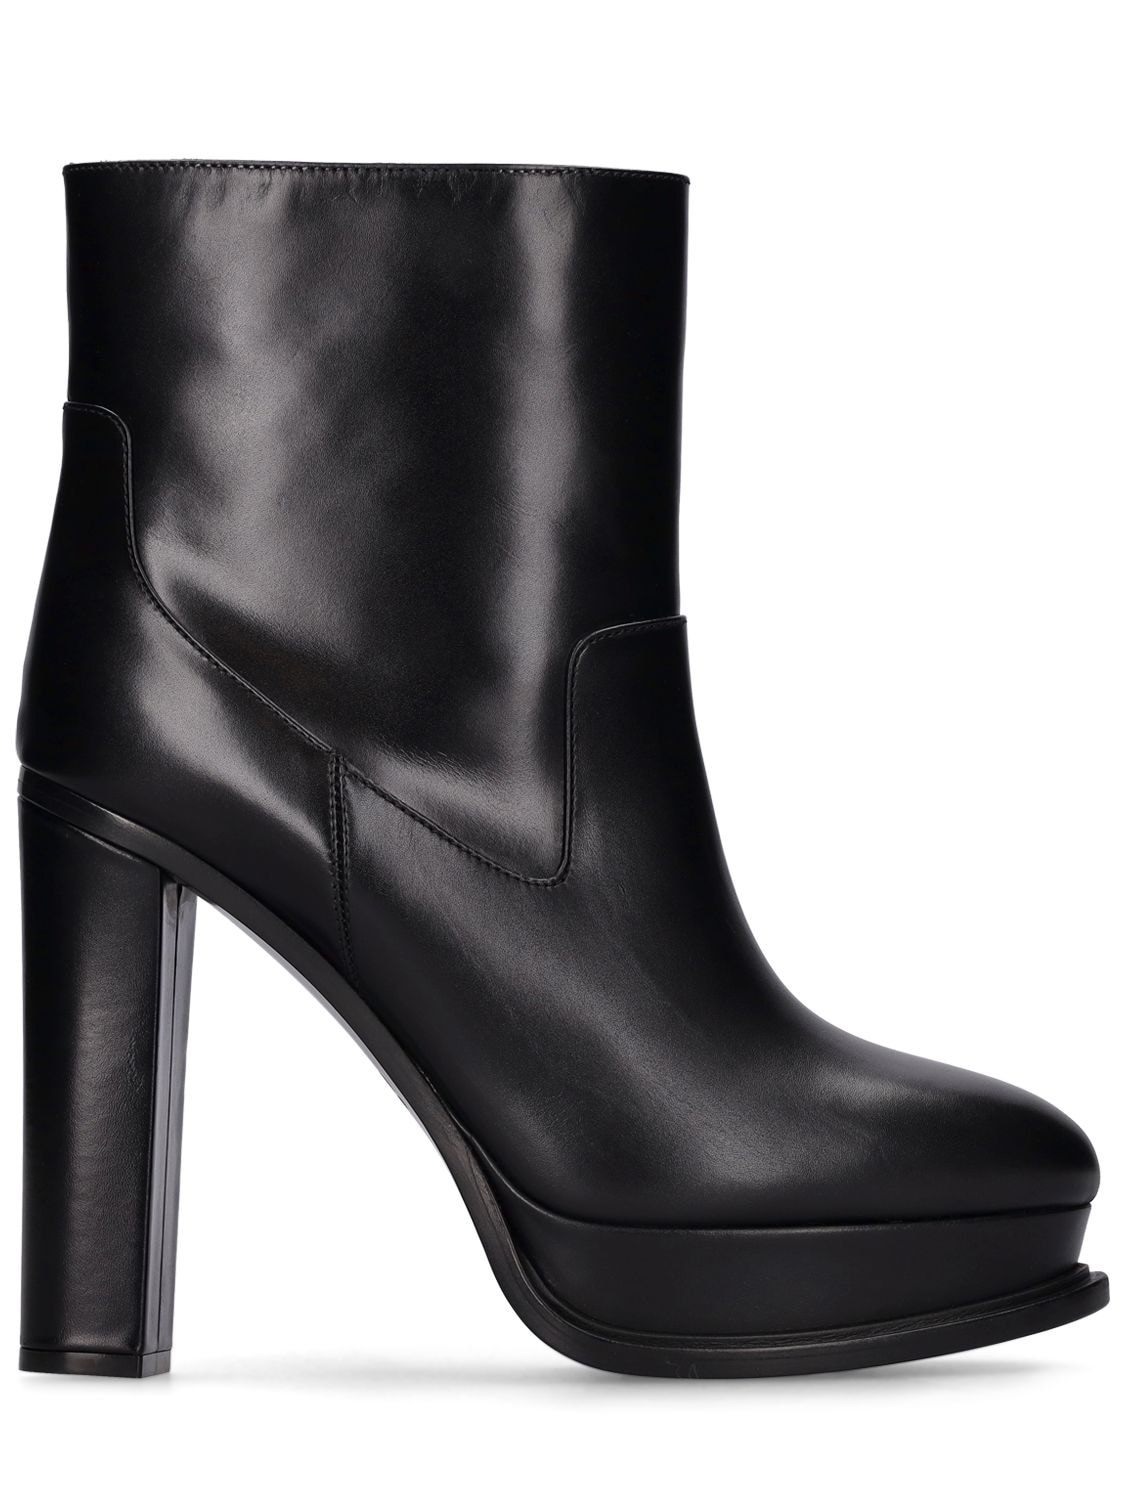 ALEXANDER MCQUEEN 120mm Leather Ankle Boots